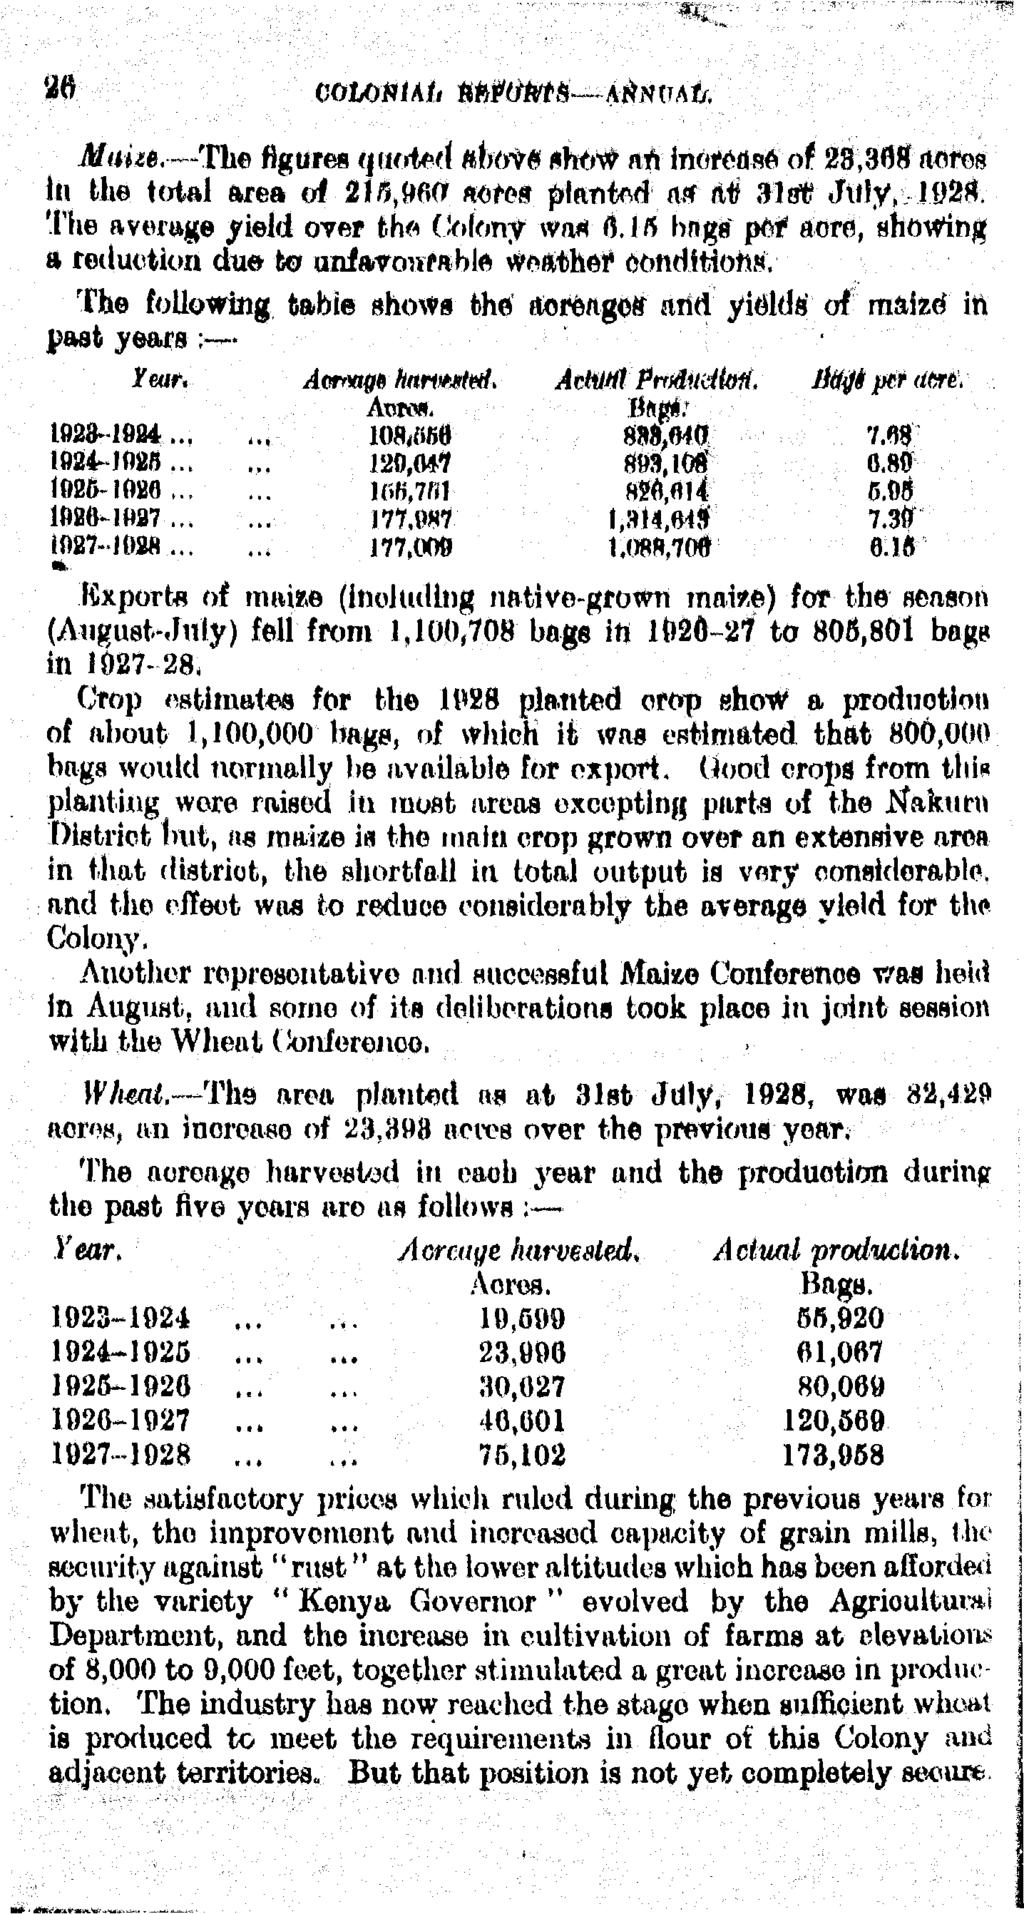 26 cohomalt M&fM&~~~A$nvAij, Mam. The figure* quoted above show art increase at 28,368 acres In the total area of 215,060 aefes jmaoted 1 a# &# 31.# July, 1928.